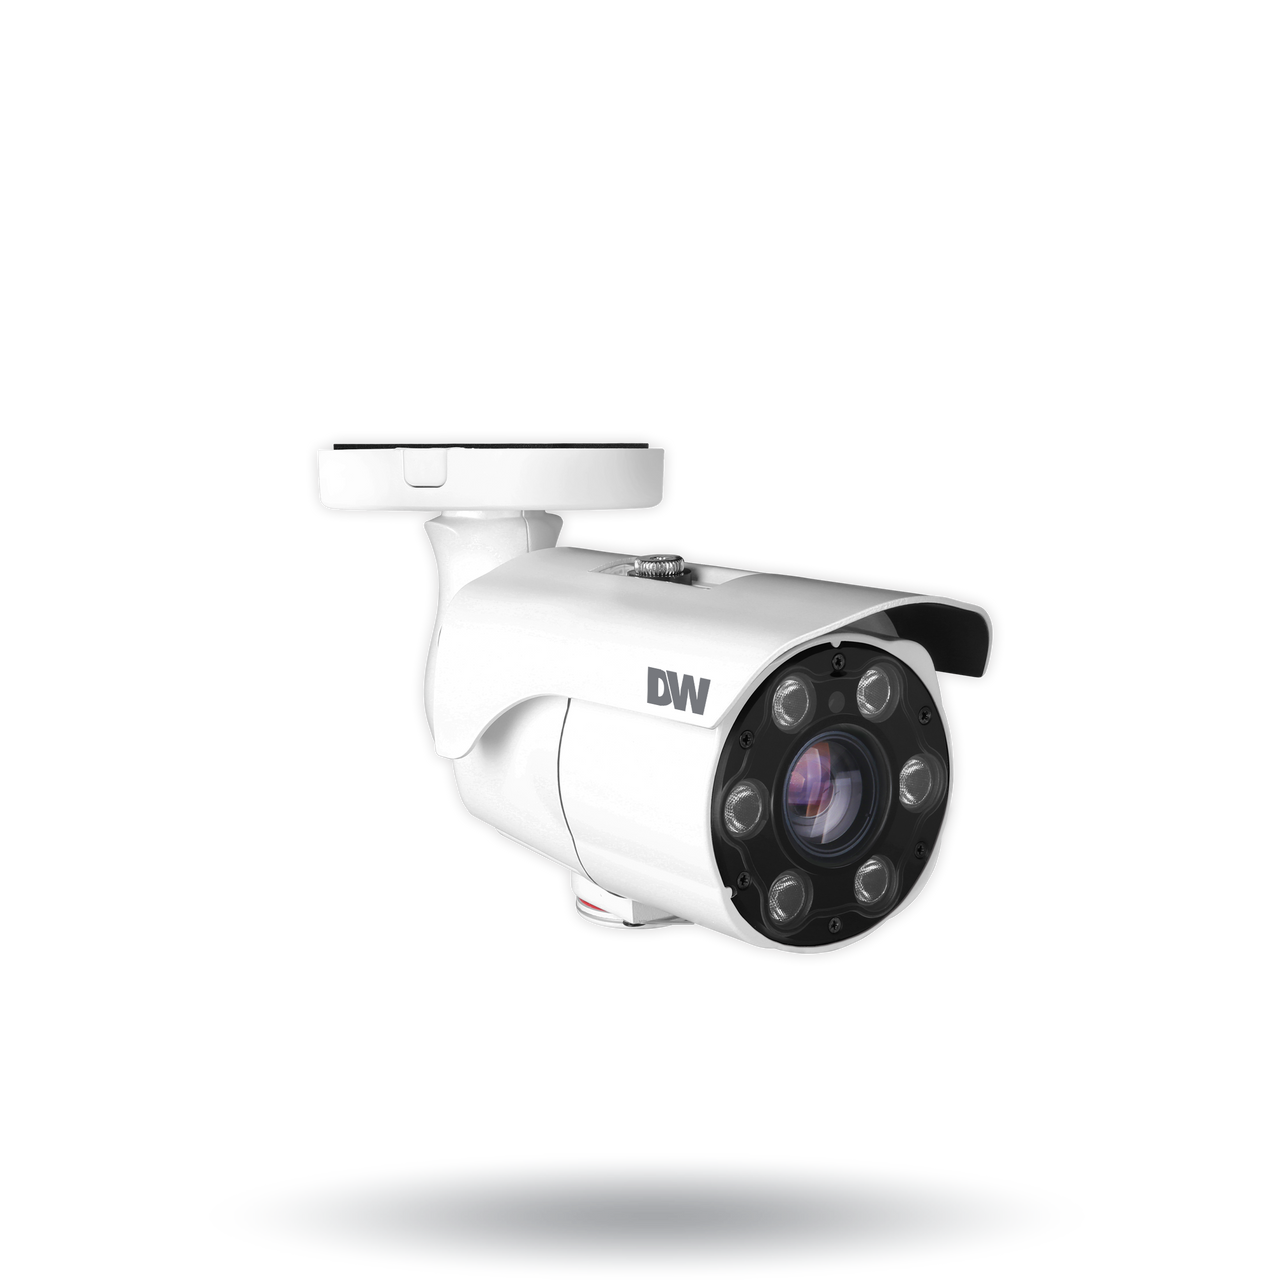 Digital Watchdog DWC-MB45Wi650TW 5MP Outdoor Bullet IP Security Camera with 6~50mm Lens and Intelligent Video Analytics